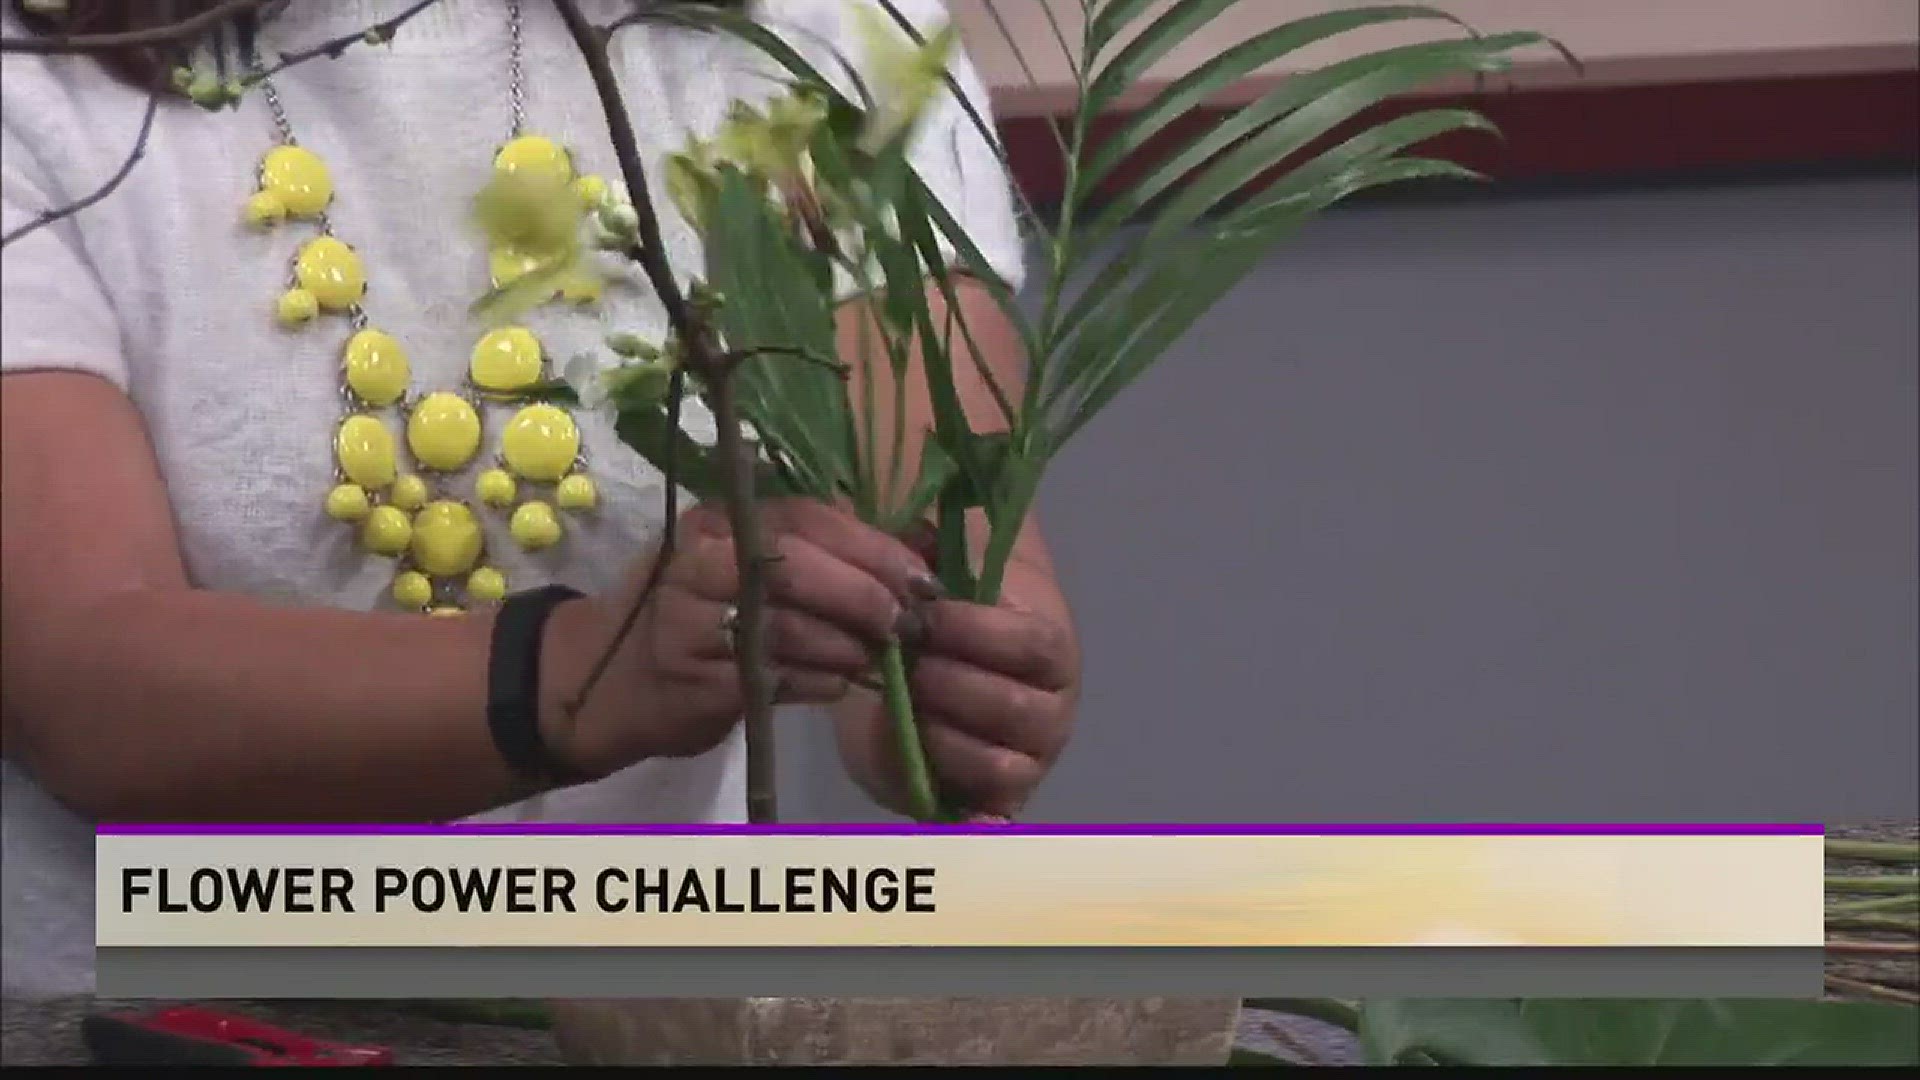 At the West Michigan Home and Garden Show, I'll be Competing in the uBloom Flower Power Celebrity Challenge... so today Flower expert J Schwanke from uBloom dot com is here to give me a few pointers� and help us all hone our flower arranging skills!